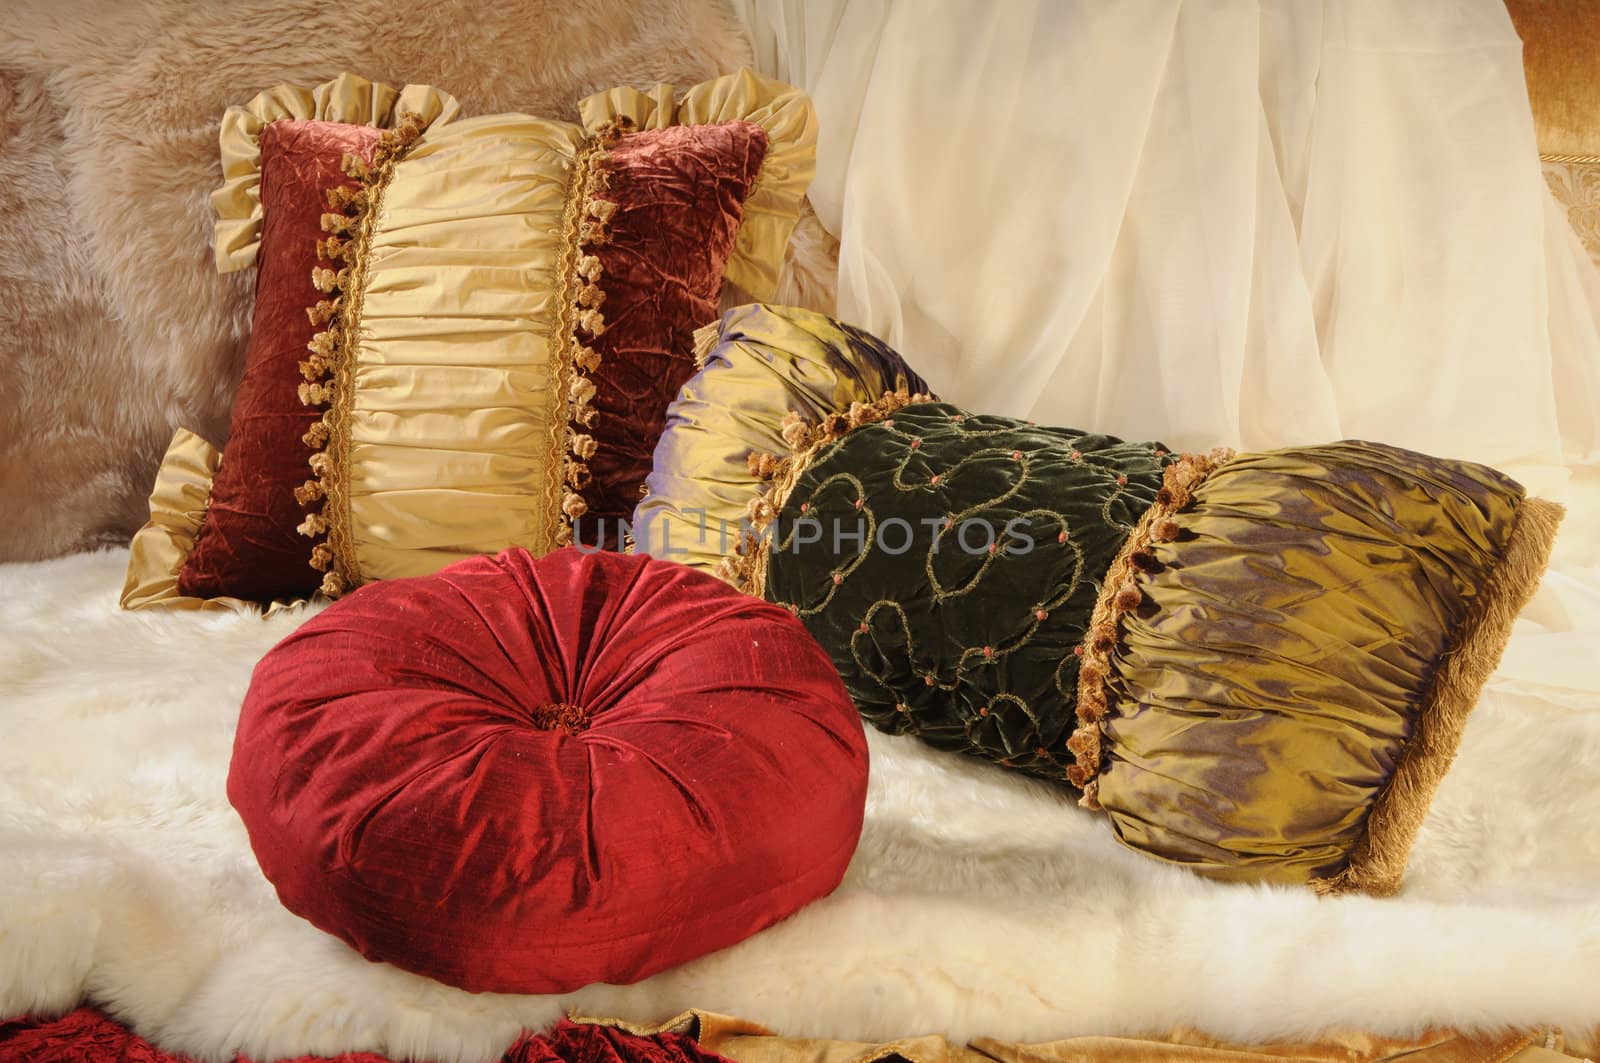 Cushions by dyoma